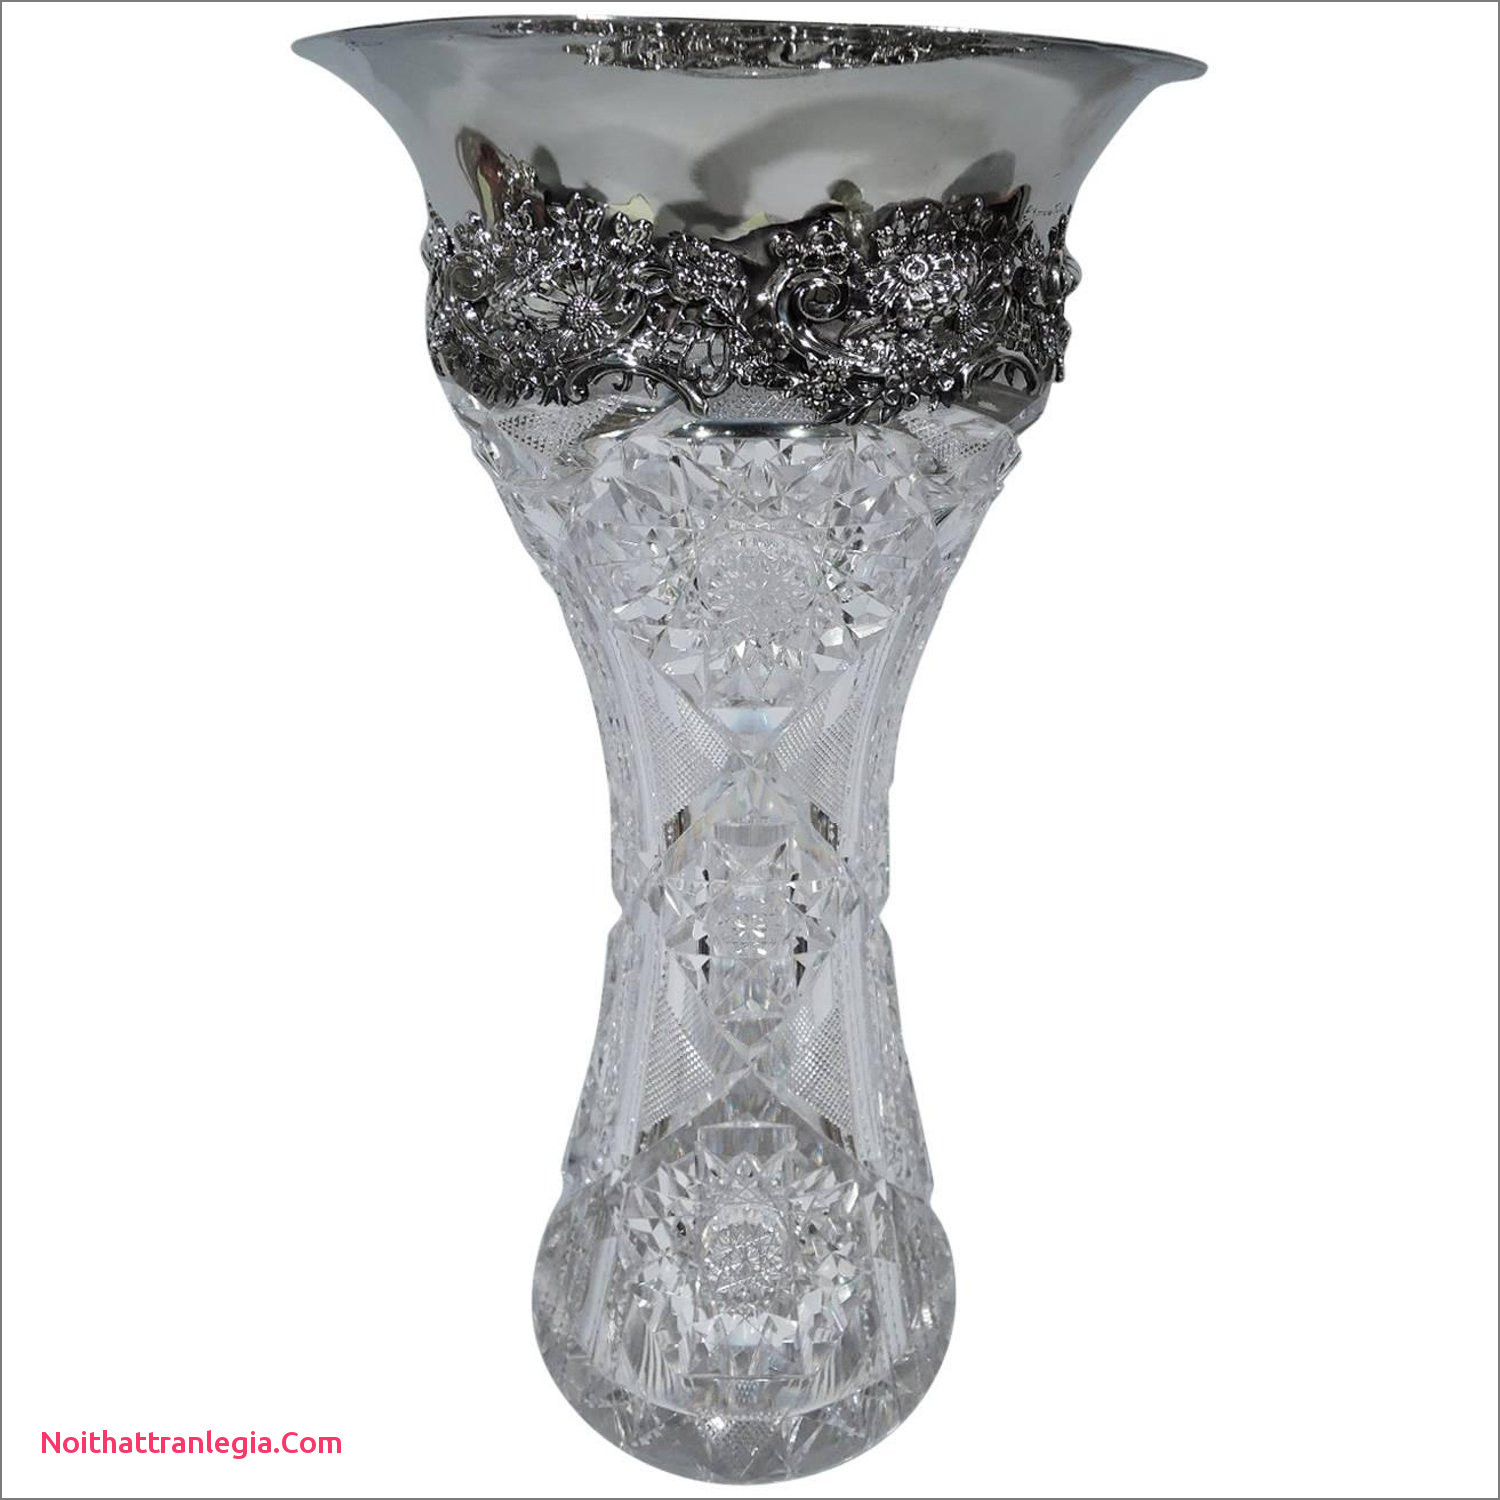 12 attractive Old Waterford Crystal Vase 2024 free download old waterford crystal vase of 20 cut glass antique vase noithattranlegia vases design for antique brilliant cut glass and sterling silver vase by redlich for sale at 1stdibs